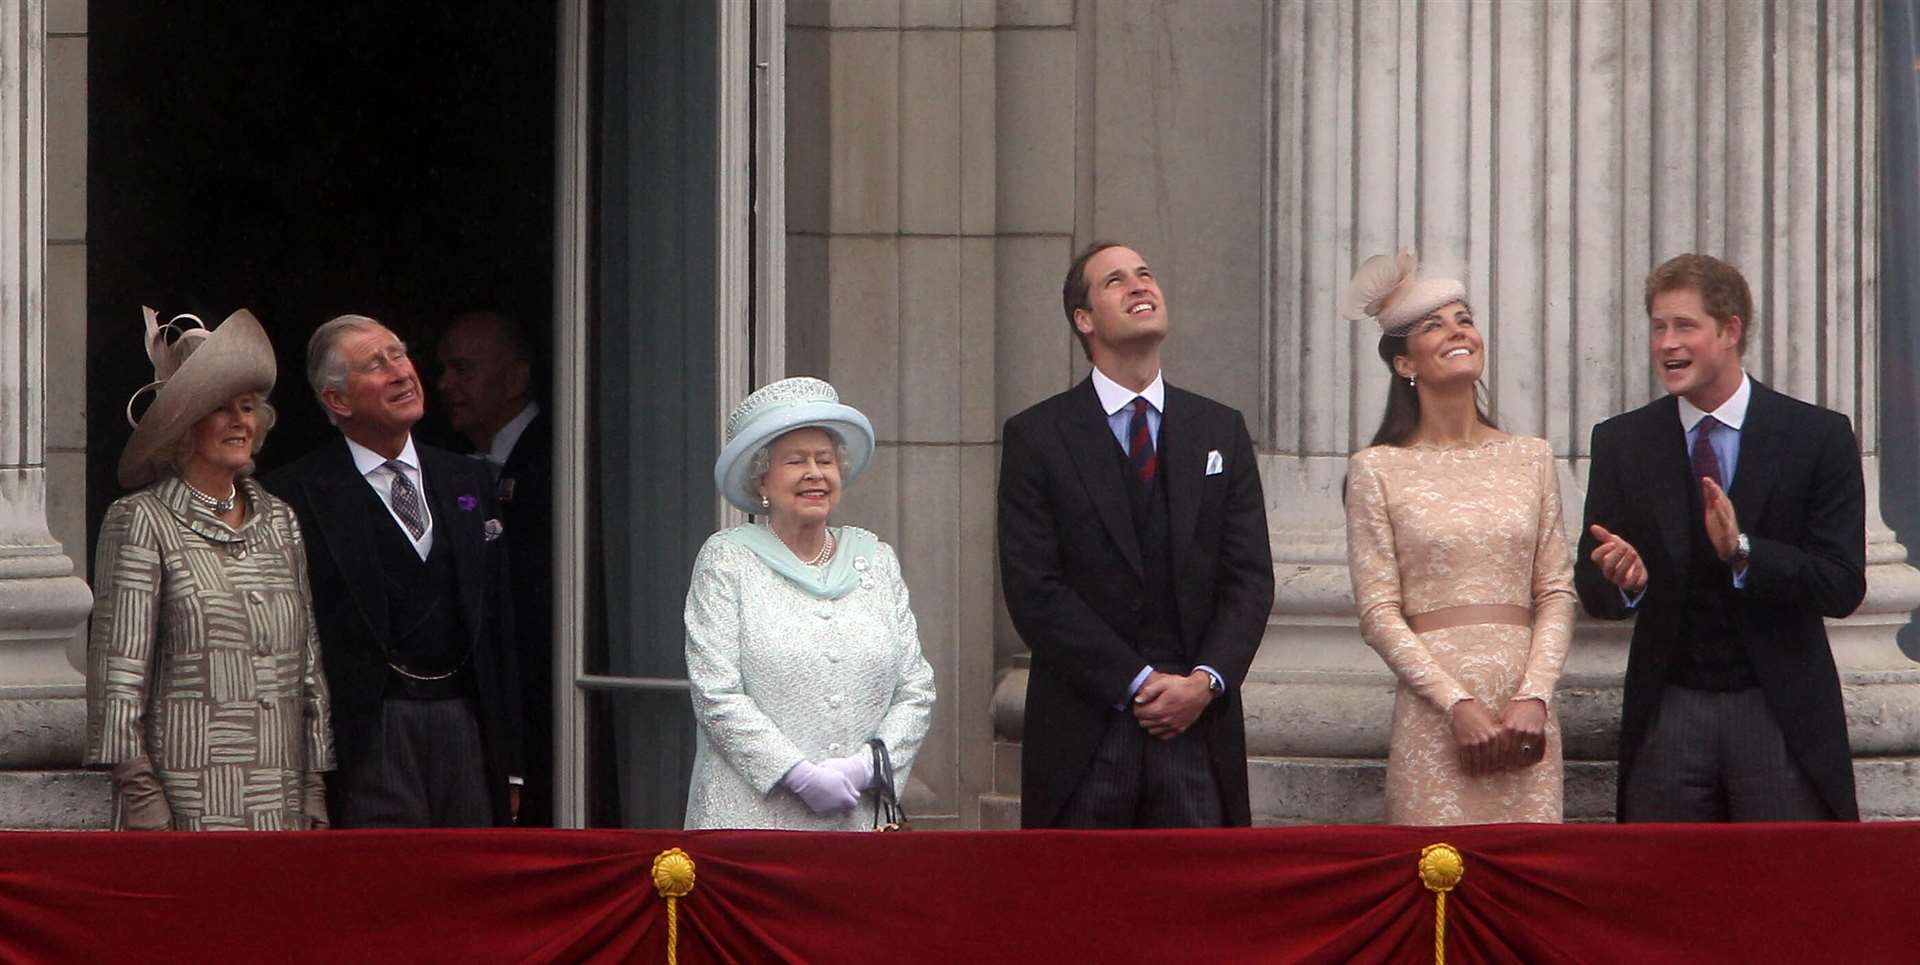 The Duke of Sussex during the Diamond Jubilee balcony appearance in 2012 (Lewis Whyld/PA)